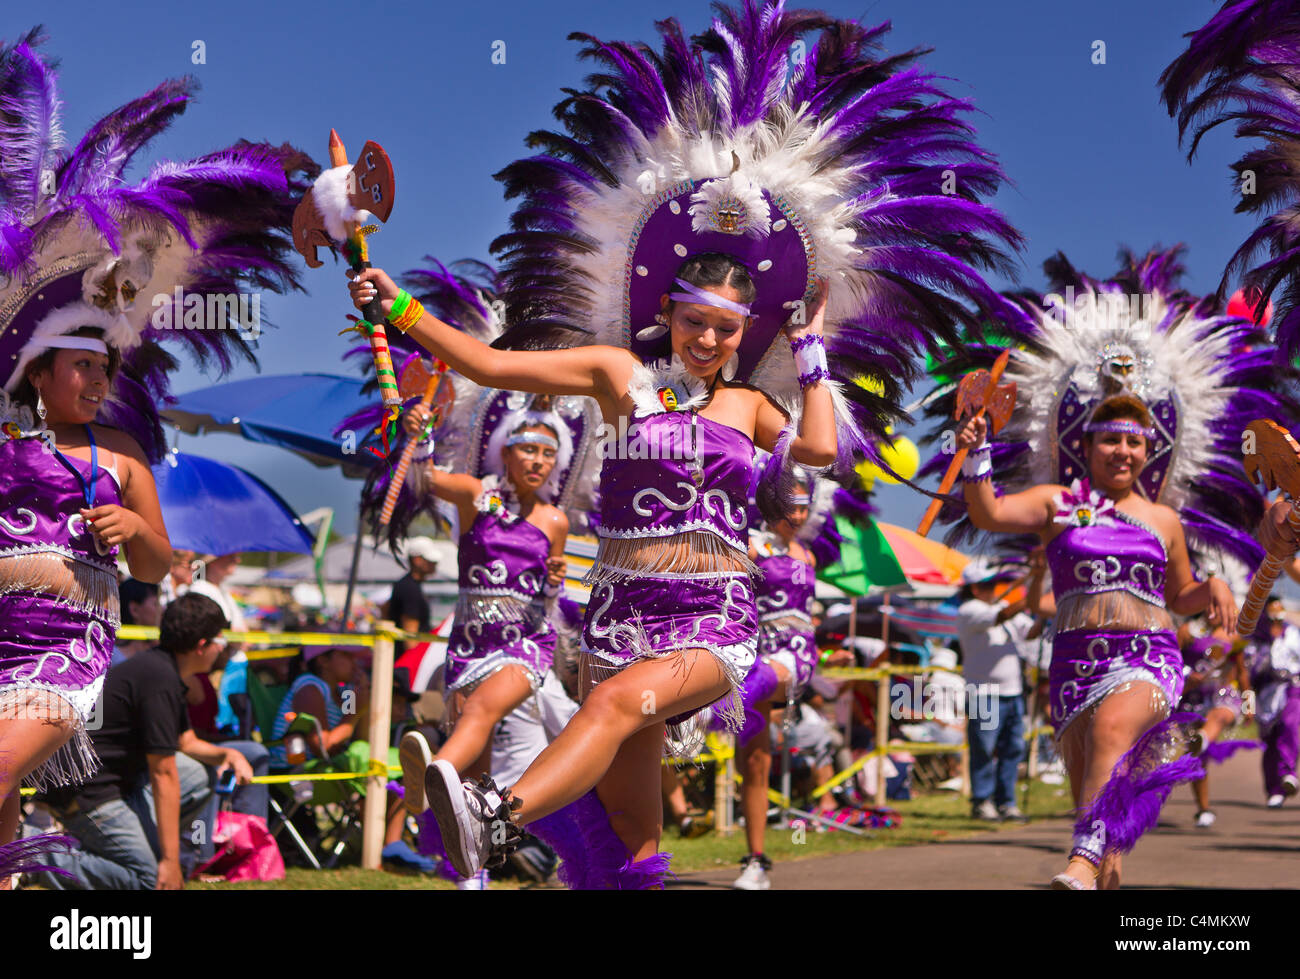 MANASSAS, VIRGINIA, USA - Women in Bolivian folklife festival parade with dancers in costume. Stock Photo